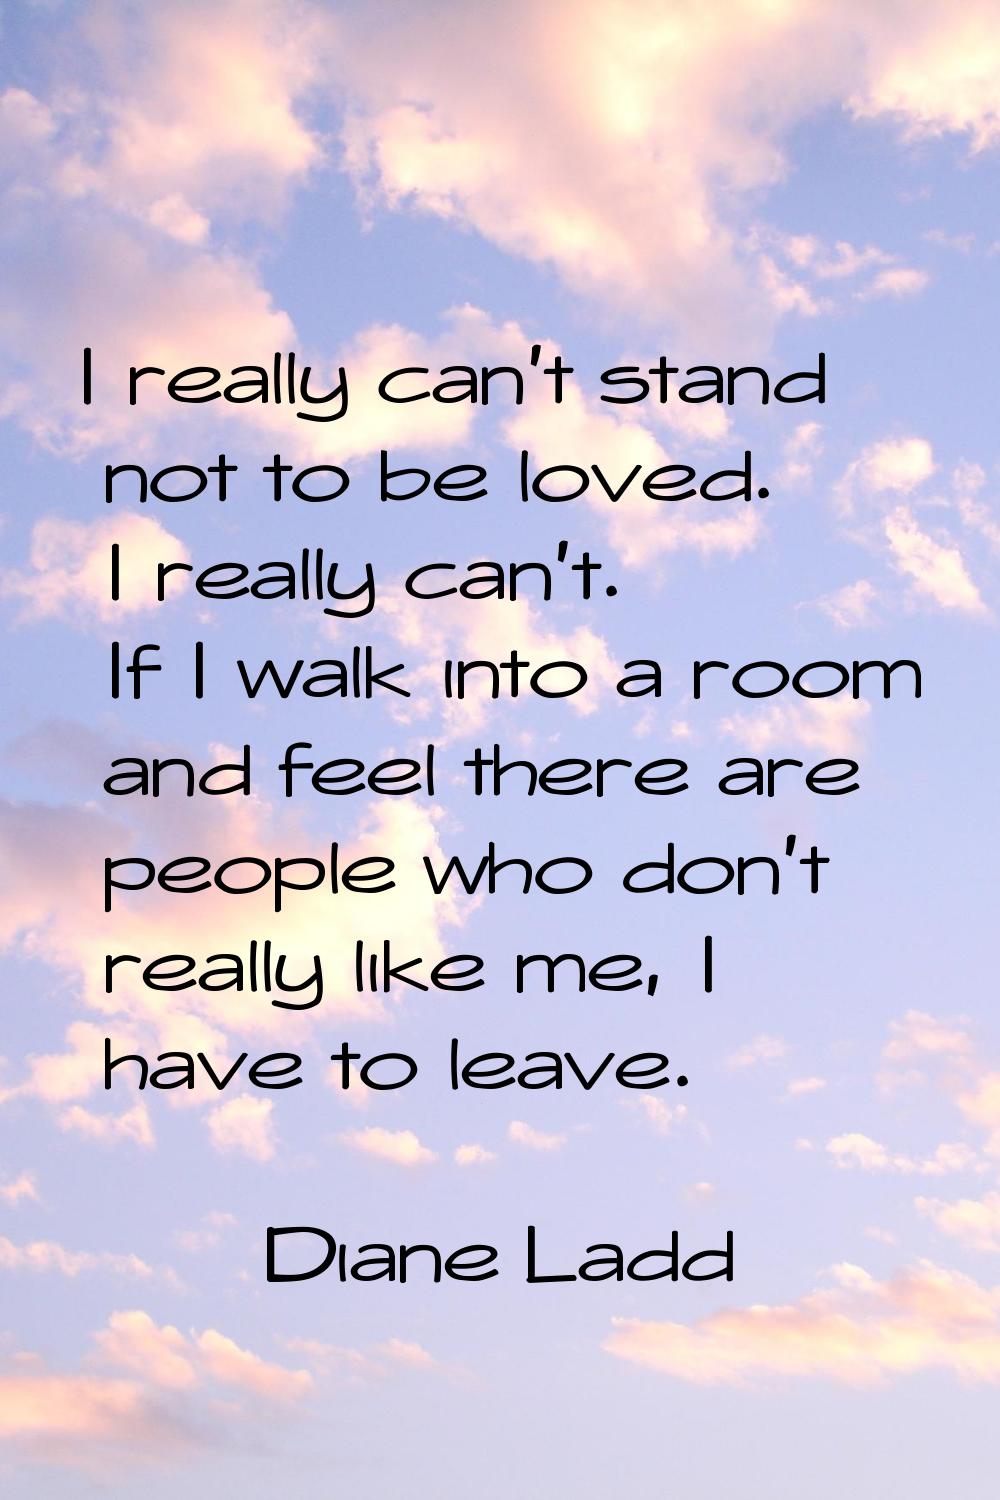 I really can't stand not to be loved. I really can't. If I walk into a room and feel there are peop